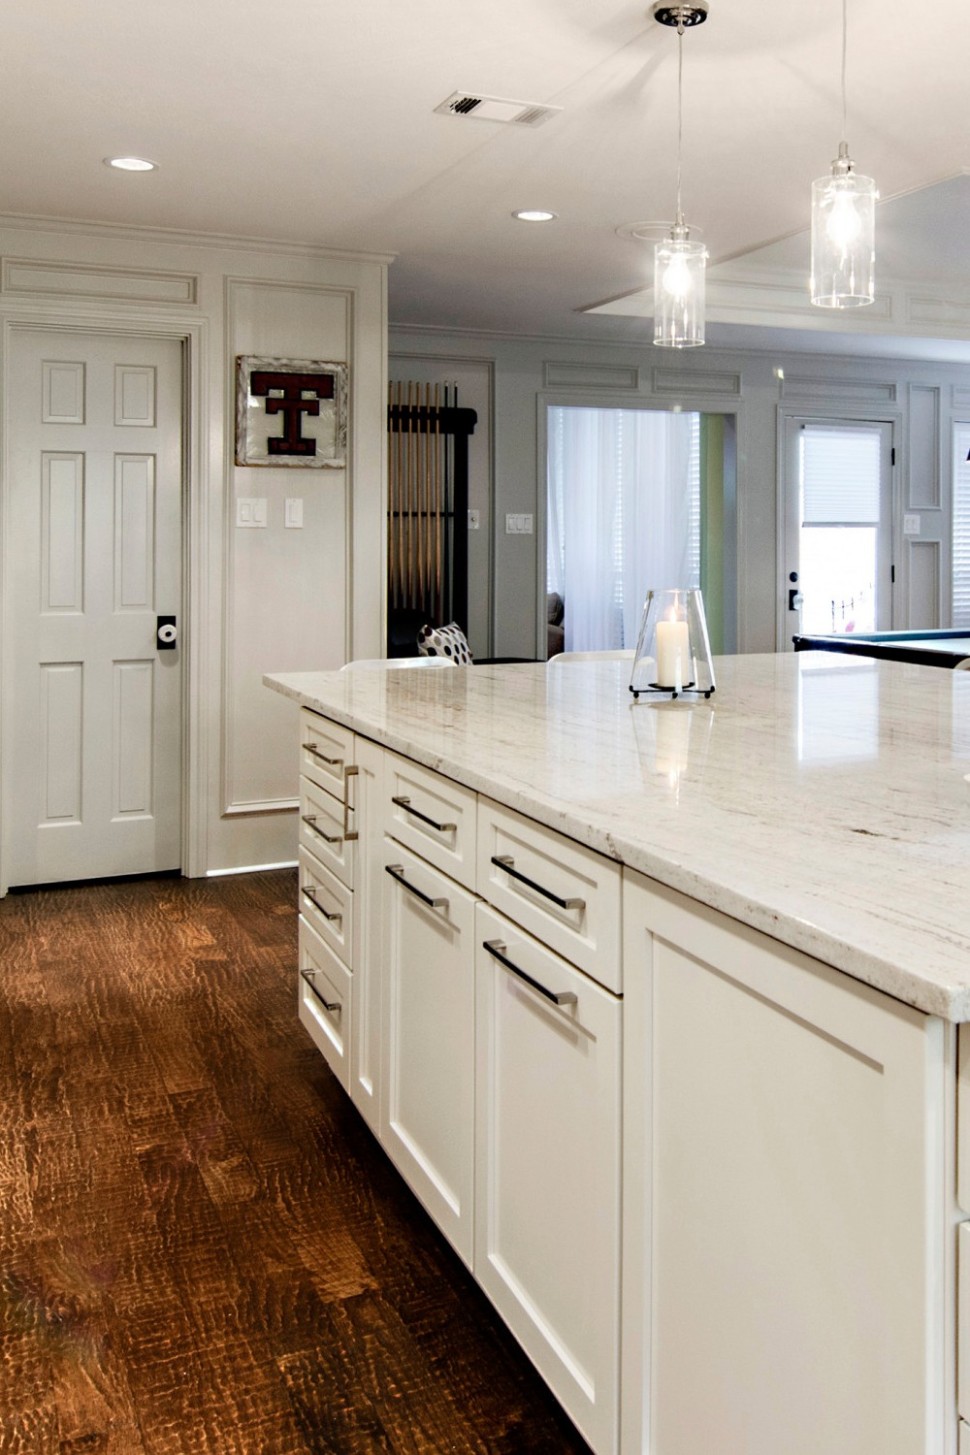 5+ Best White Granite With White Cabinets  CountertopsNews - what color granite looks best with white cabinets?